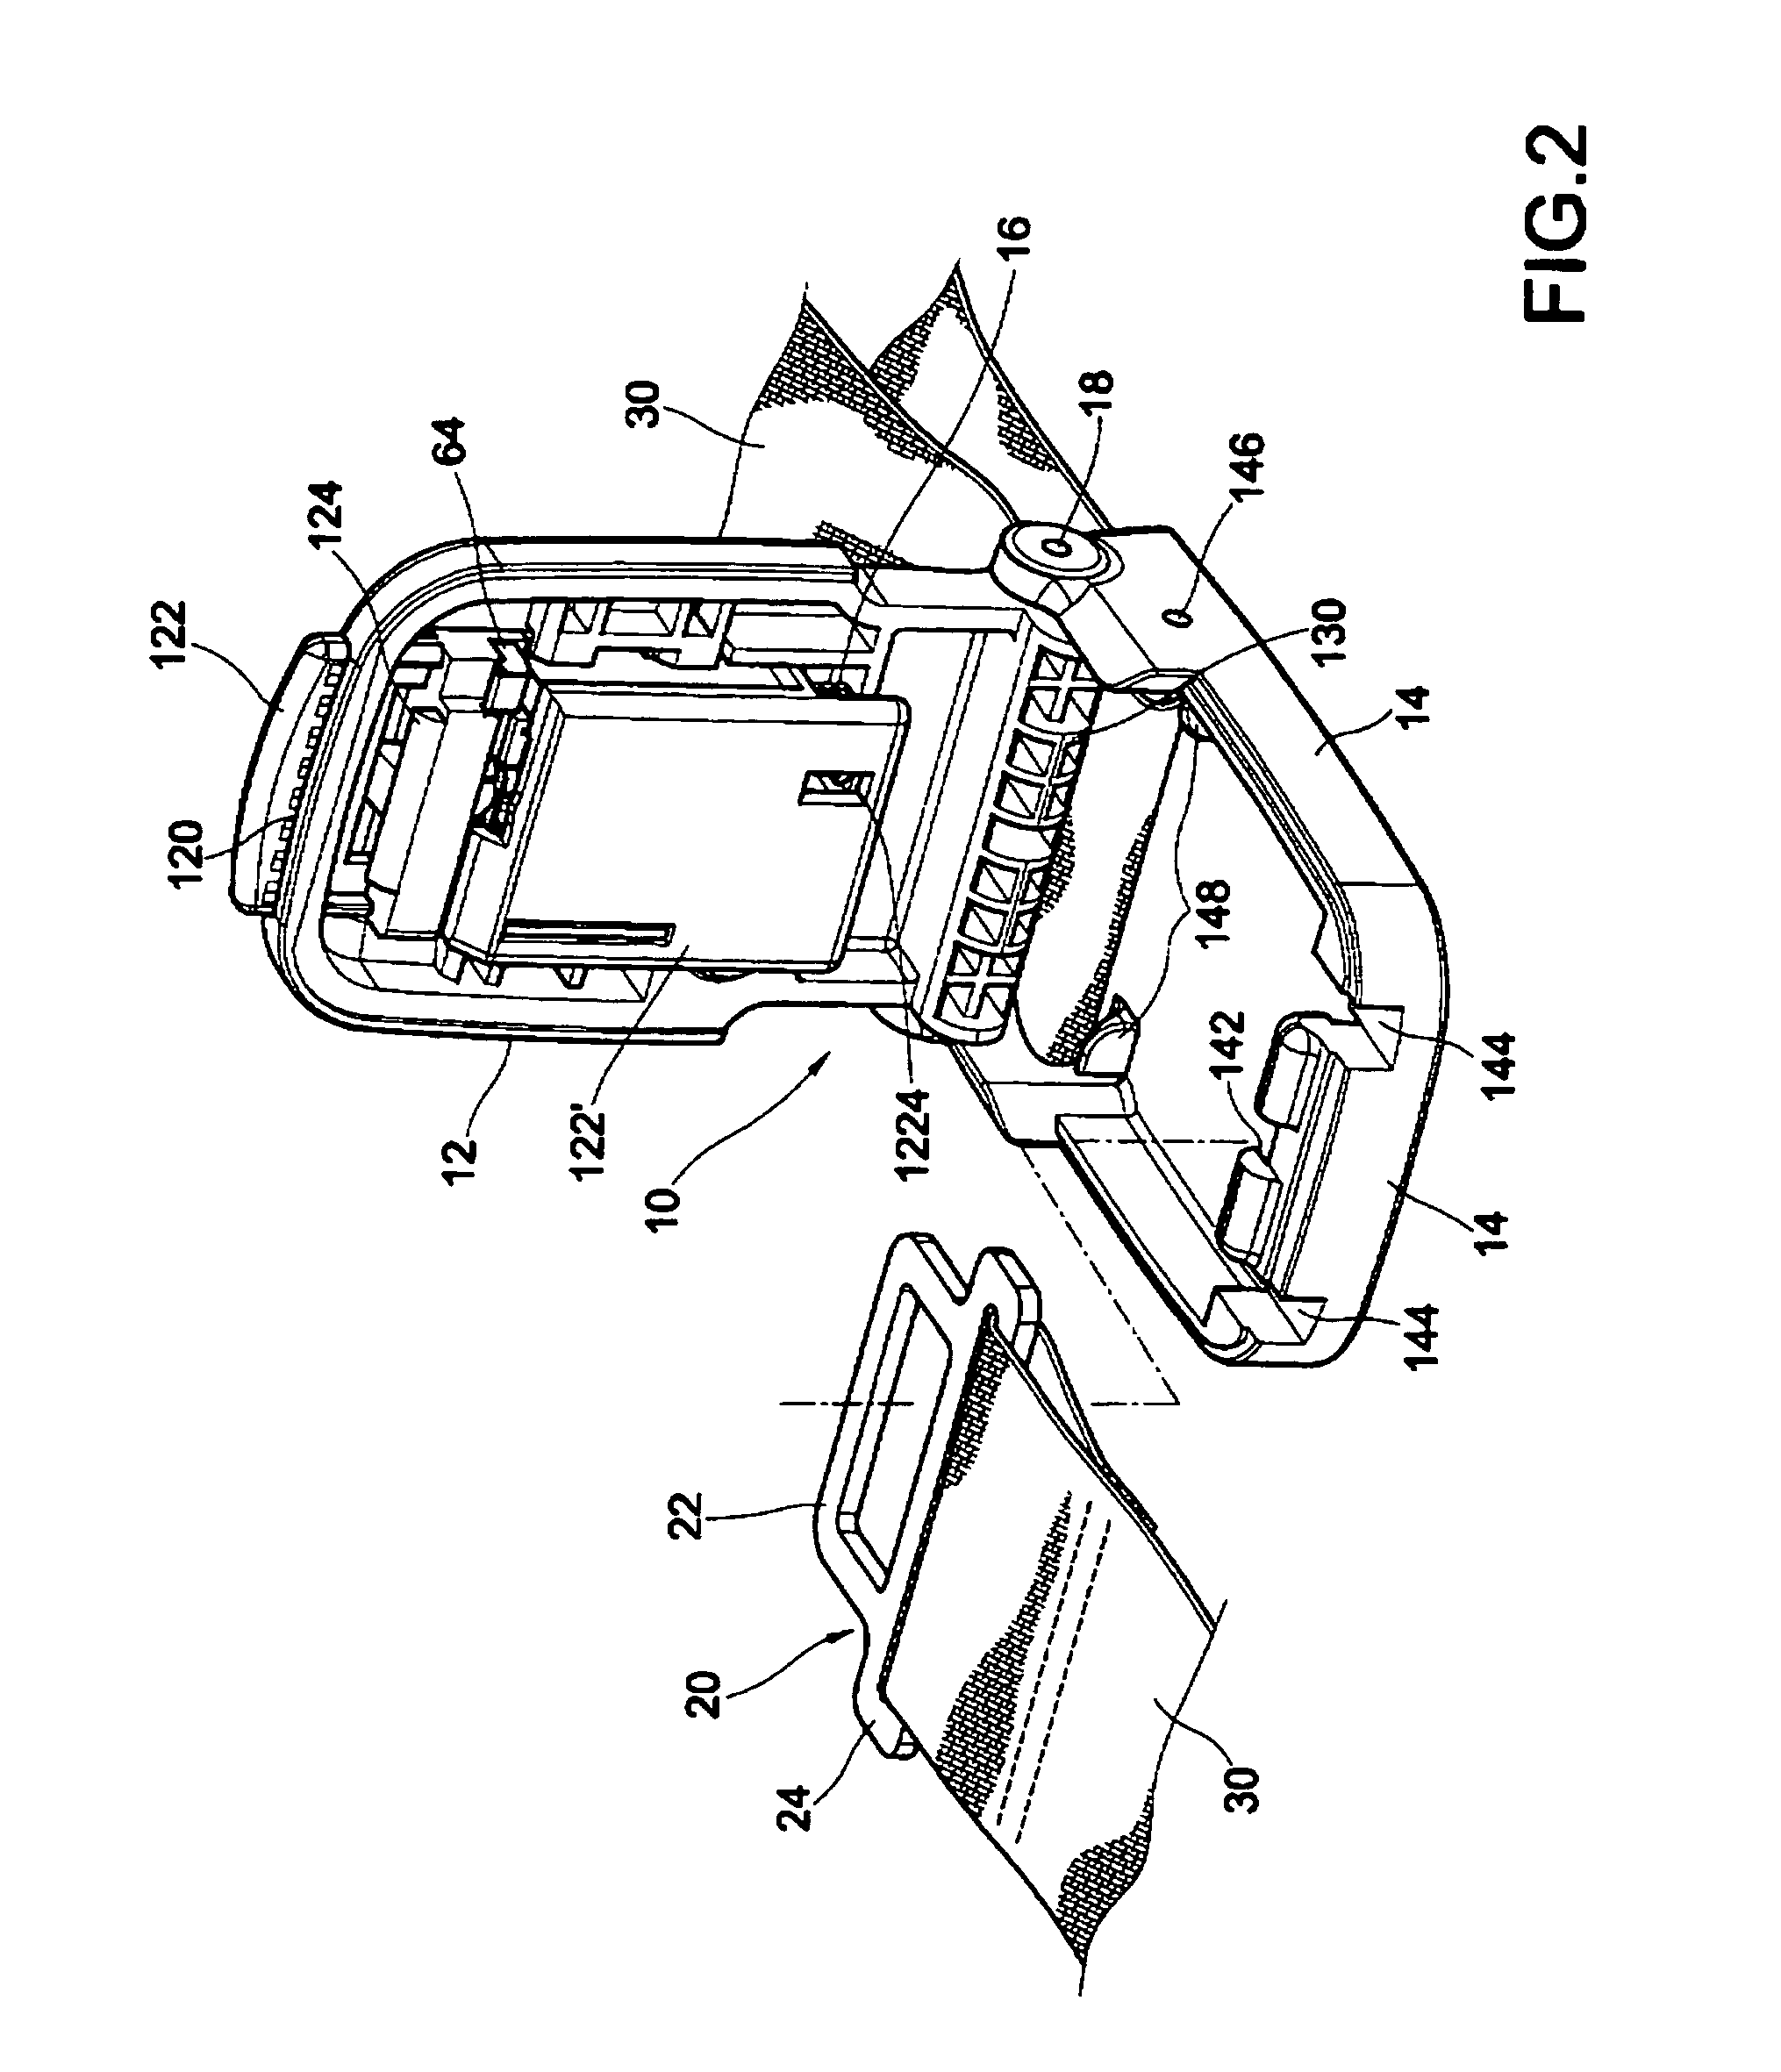 Strap lock with both functions of combination code setting and key operation